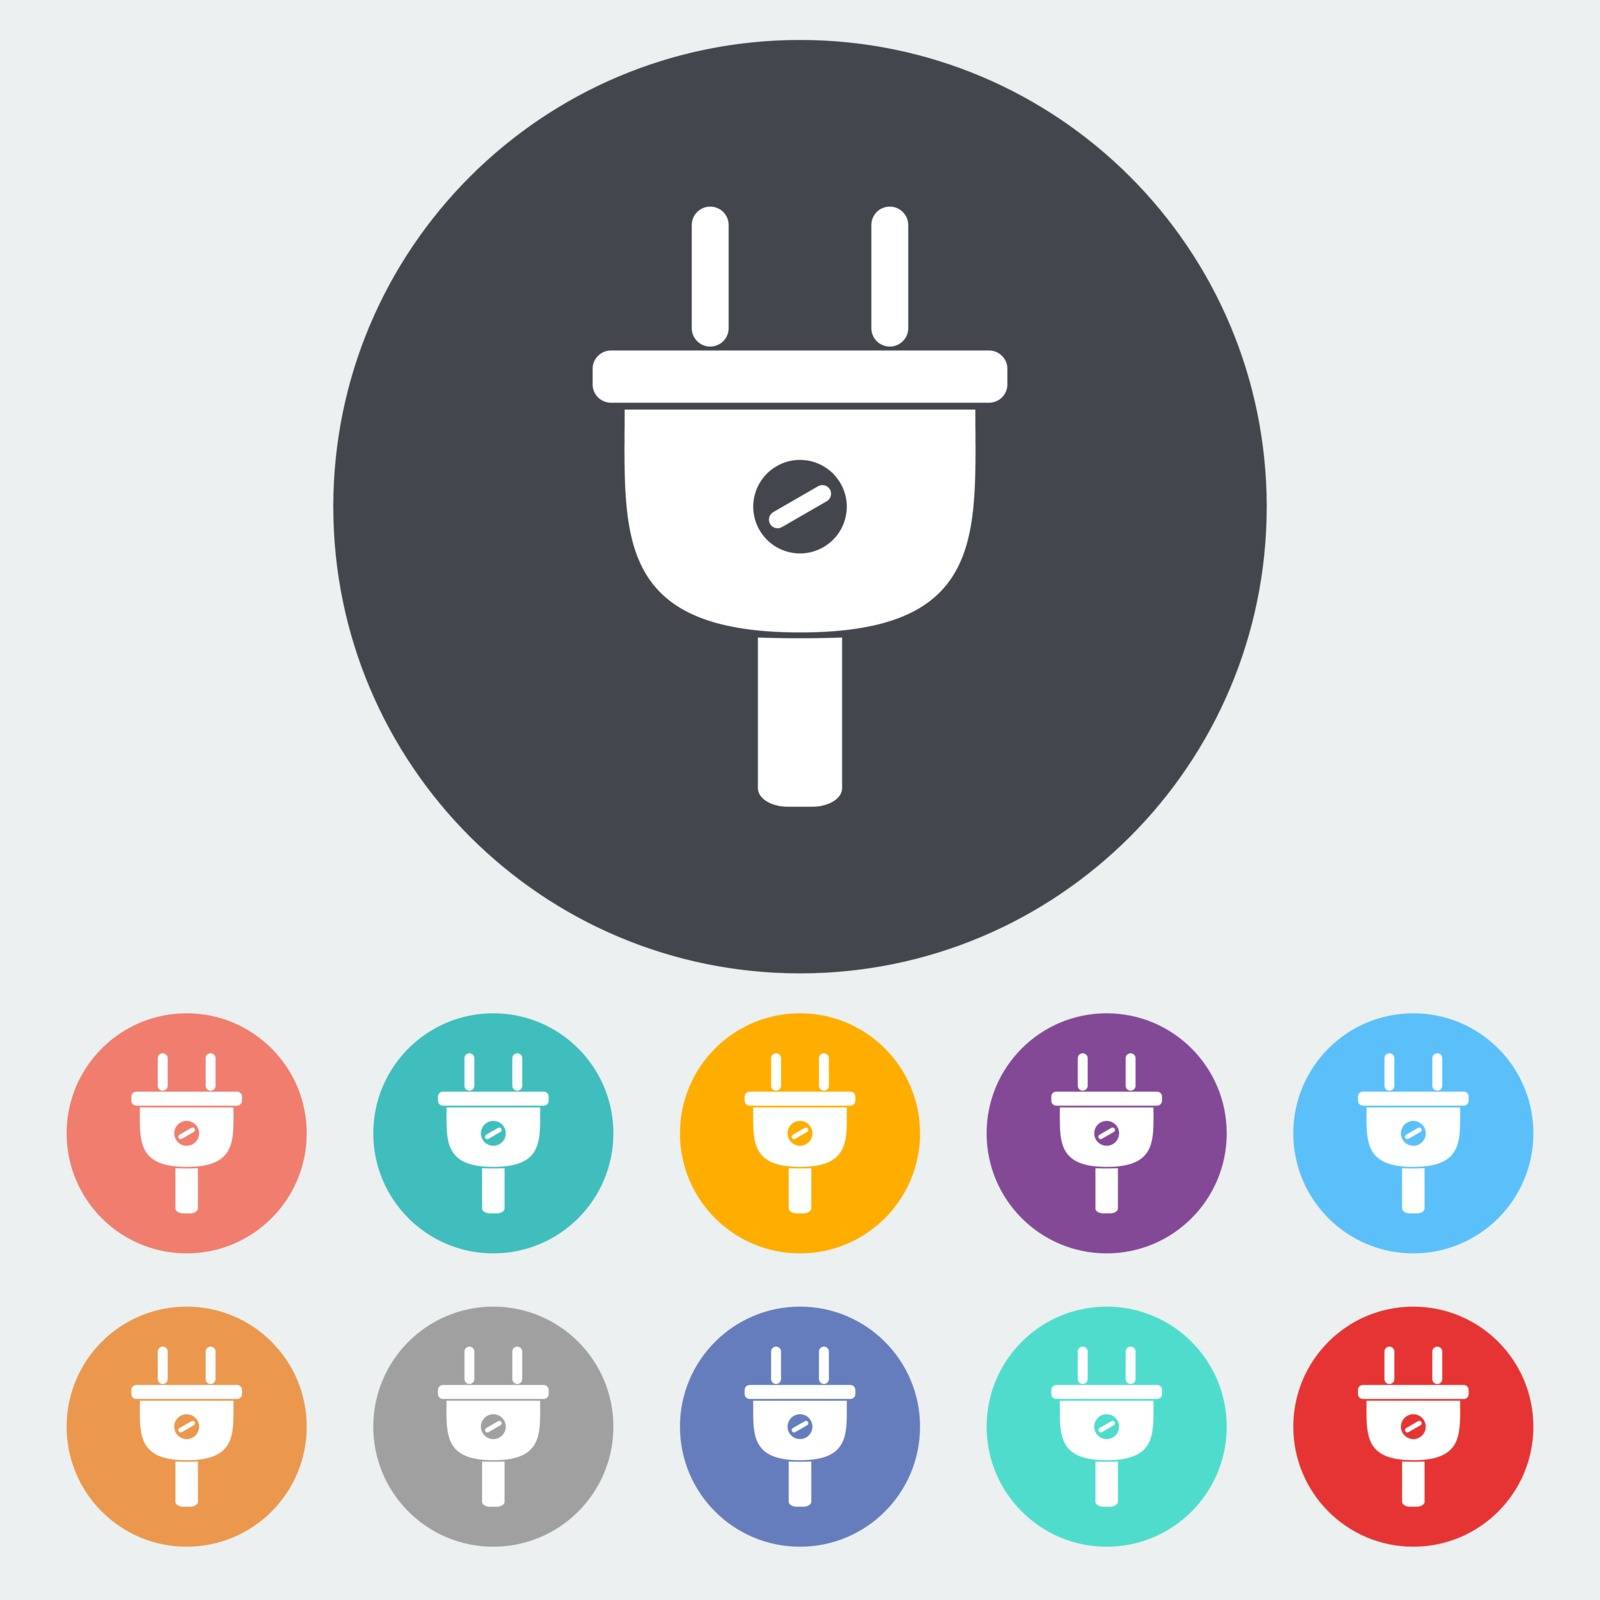 Electrical plug. Single flat icon on the circle. Vector illustration.